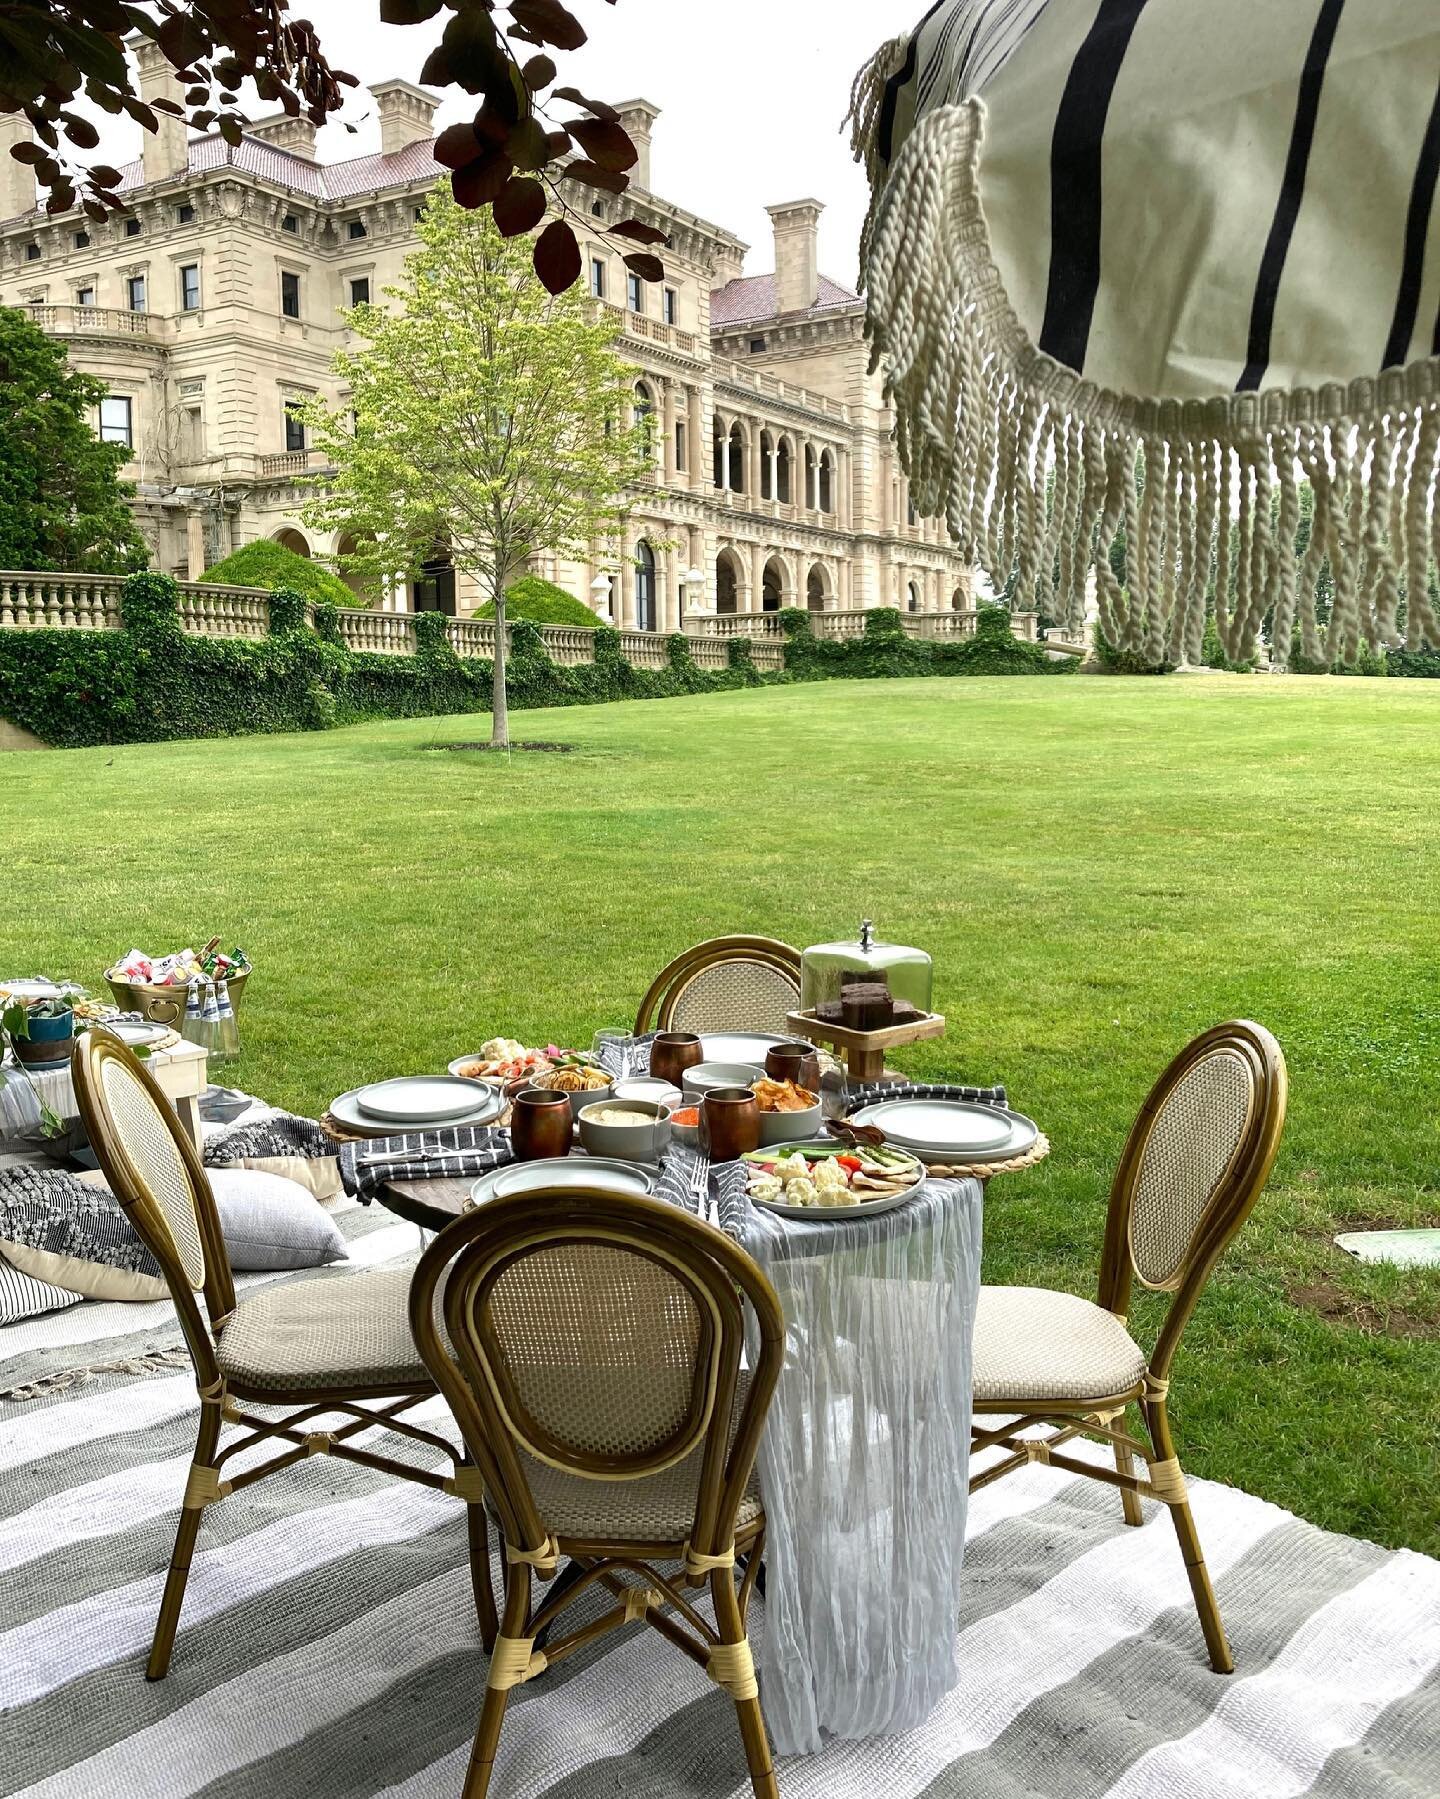 Let us bring the elegance to your next picnic. 
#stoneacre #newportri #TheClassicCoast #newportmansions